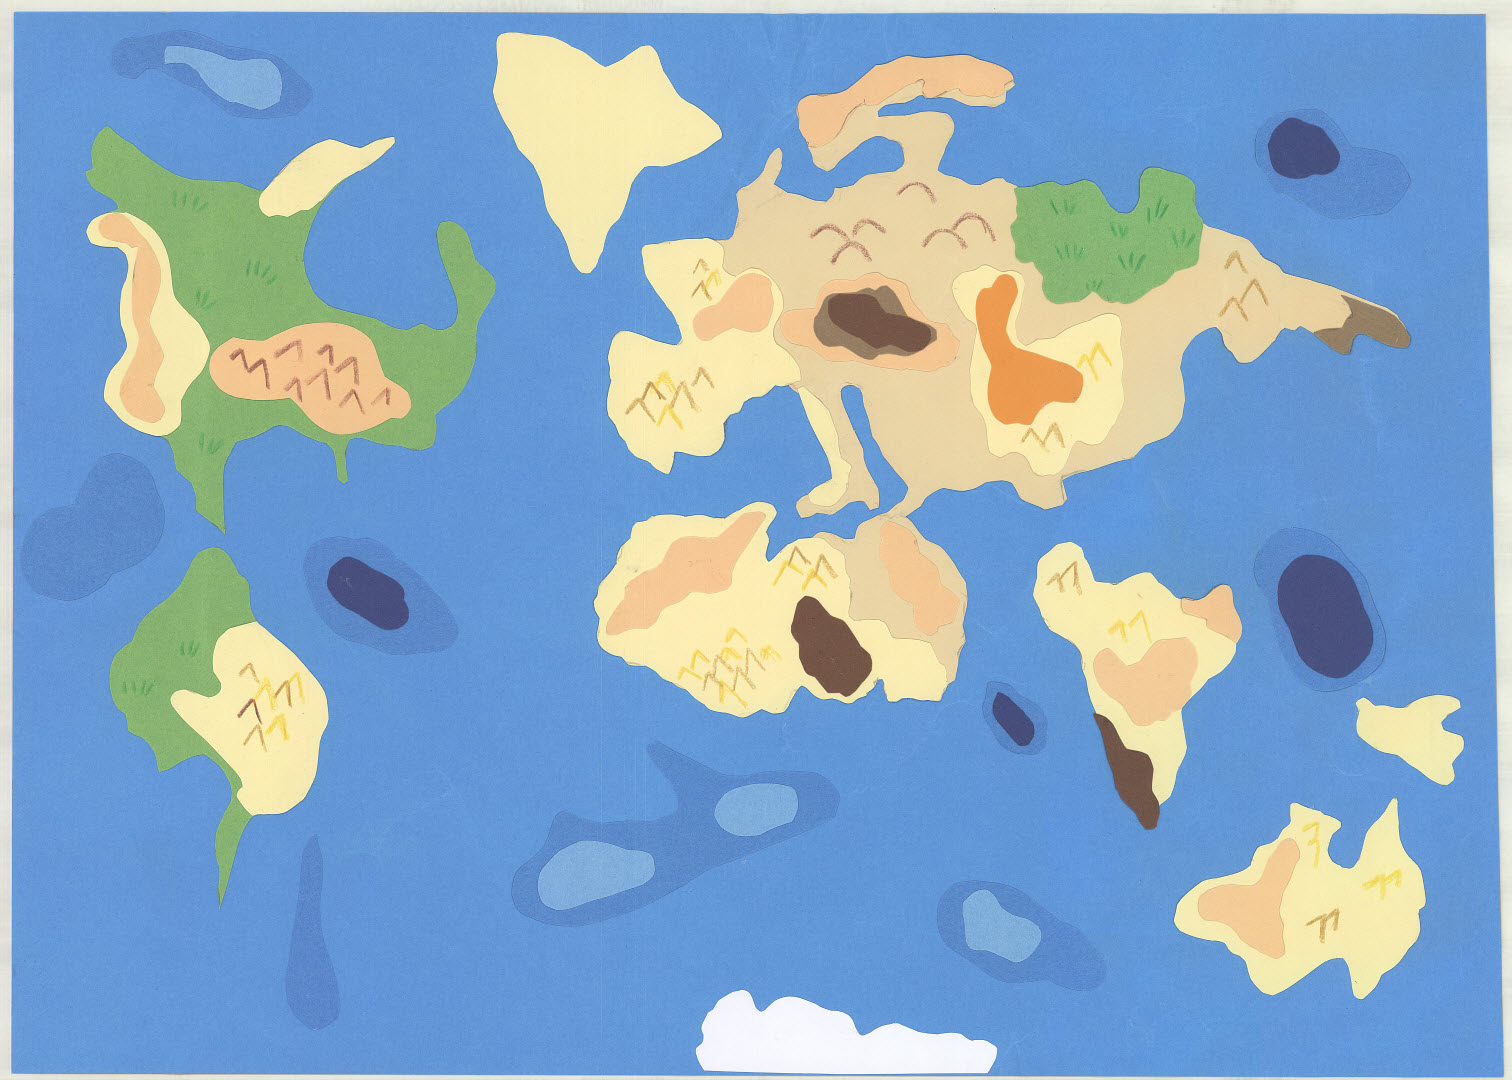 Map of continents and water